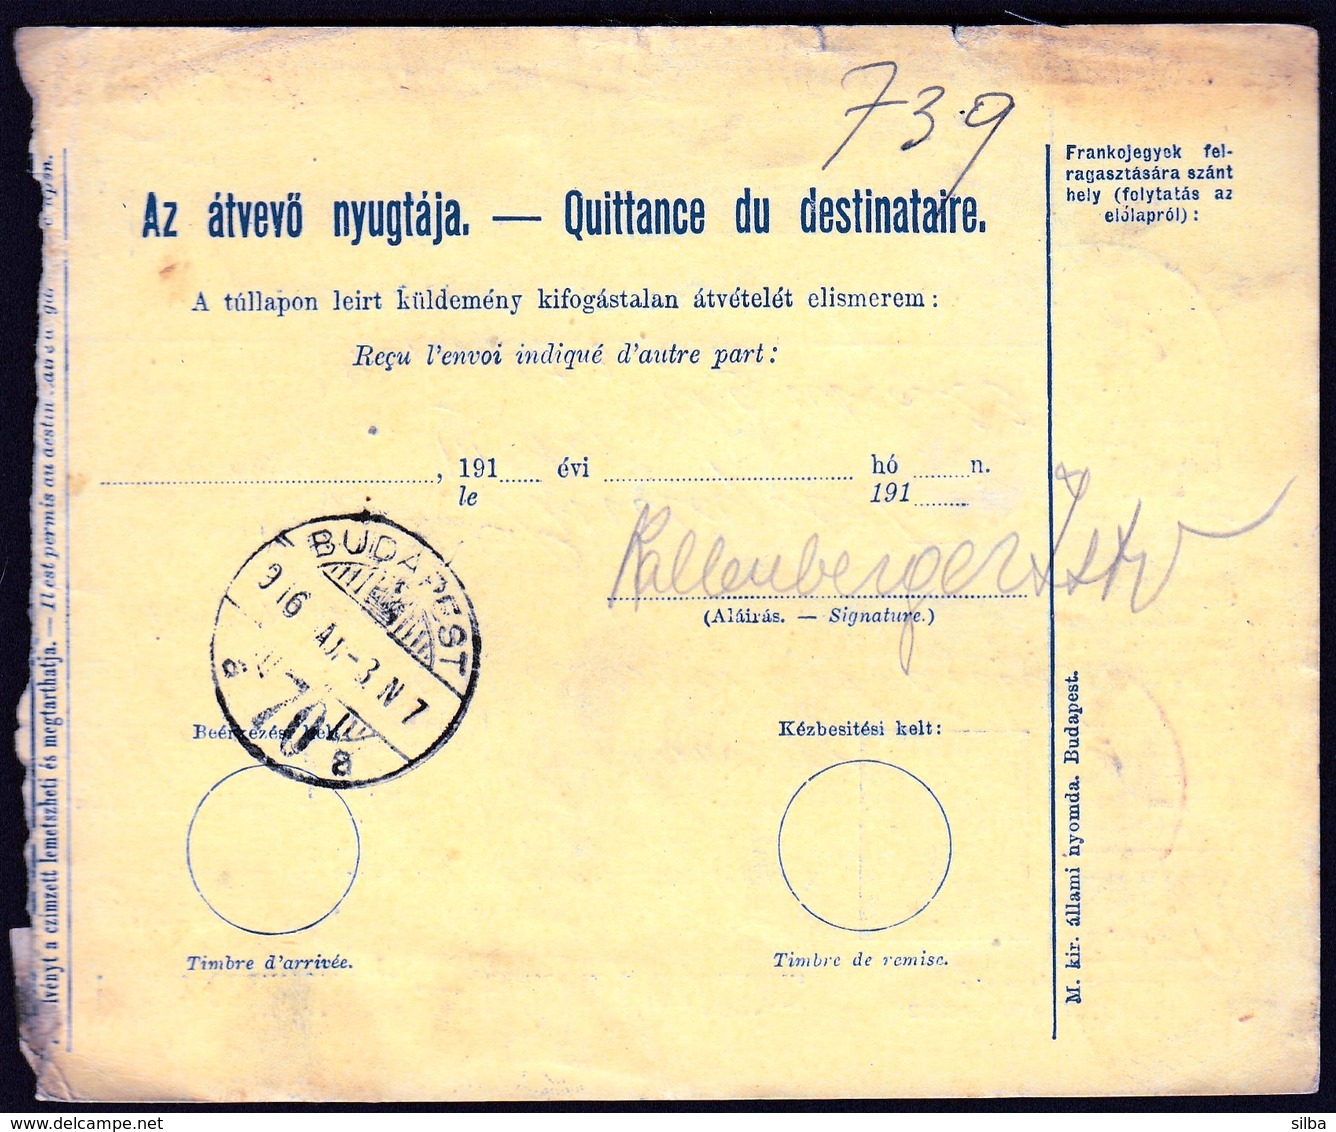 Hungary Gador 1916 / Parcel Post, Postai Szallitolevel, Bulletin D' Expedition / To Budapest - Parcel Post